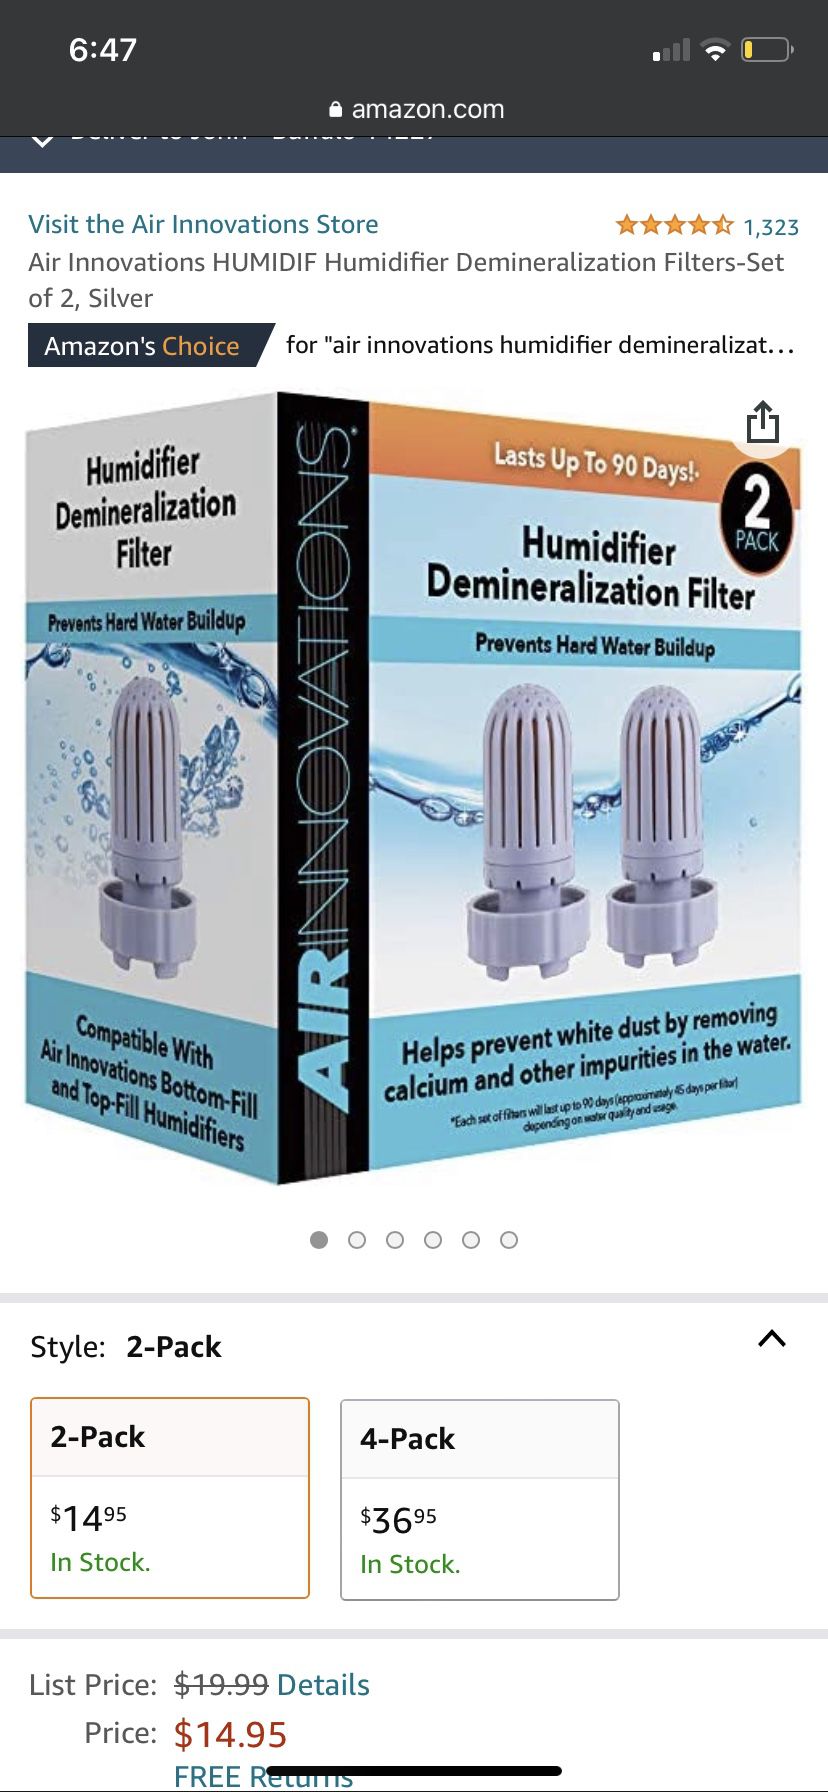 Brand New Air Innovations Humidifier Demineralization Filter 2 Pack